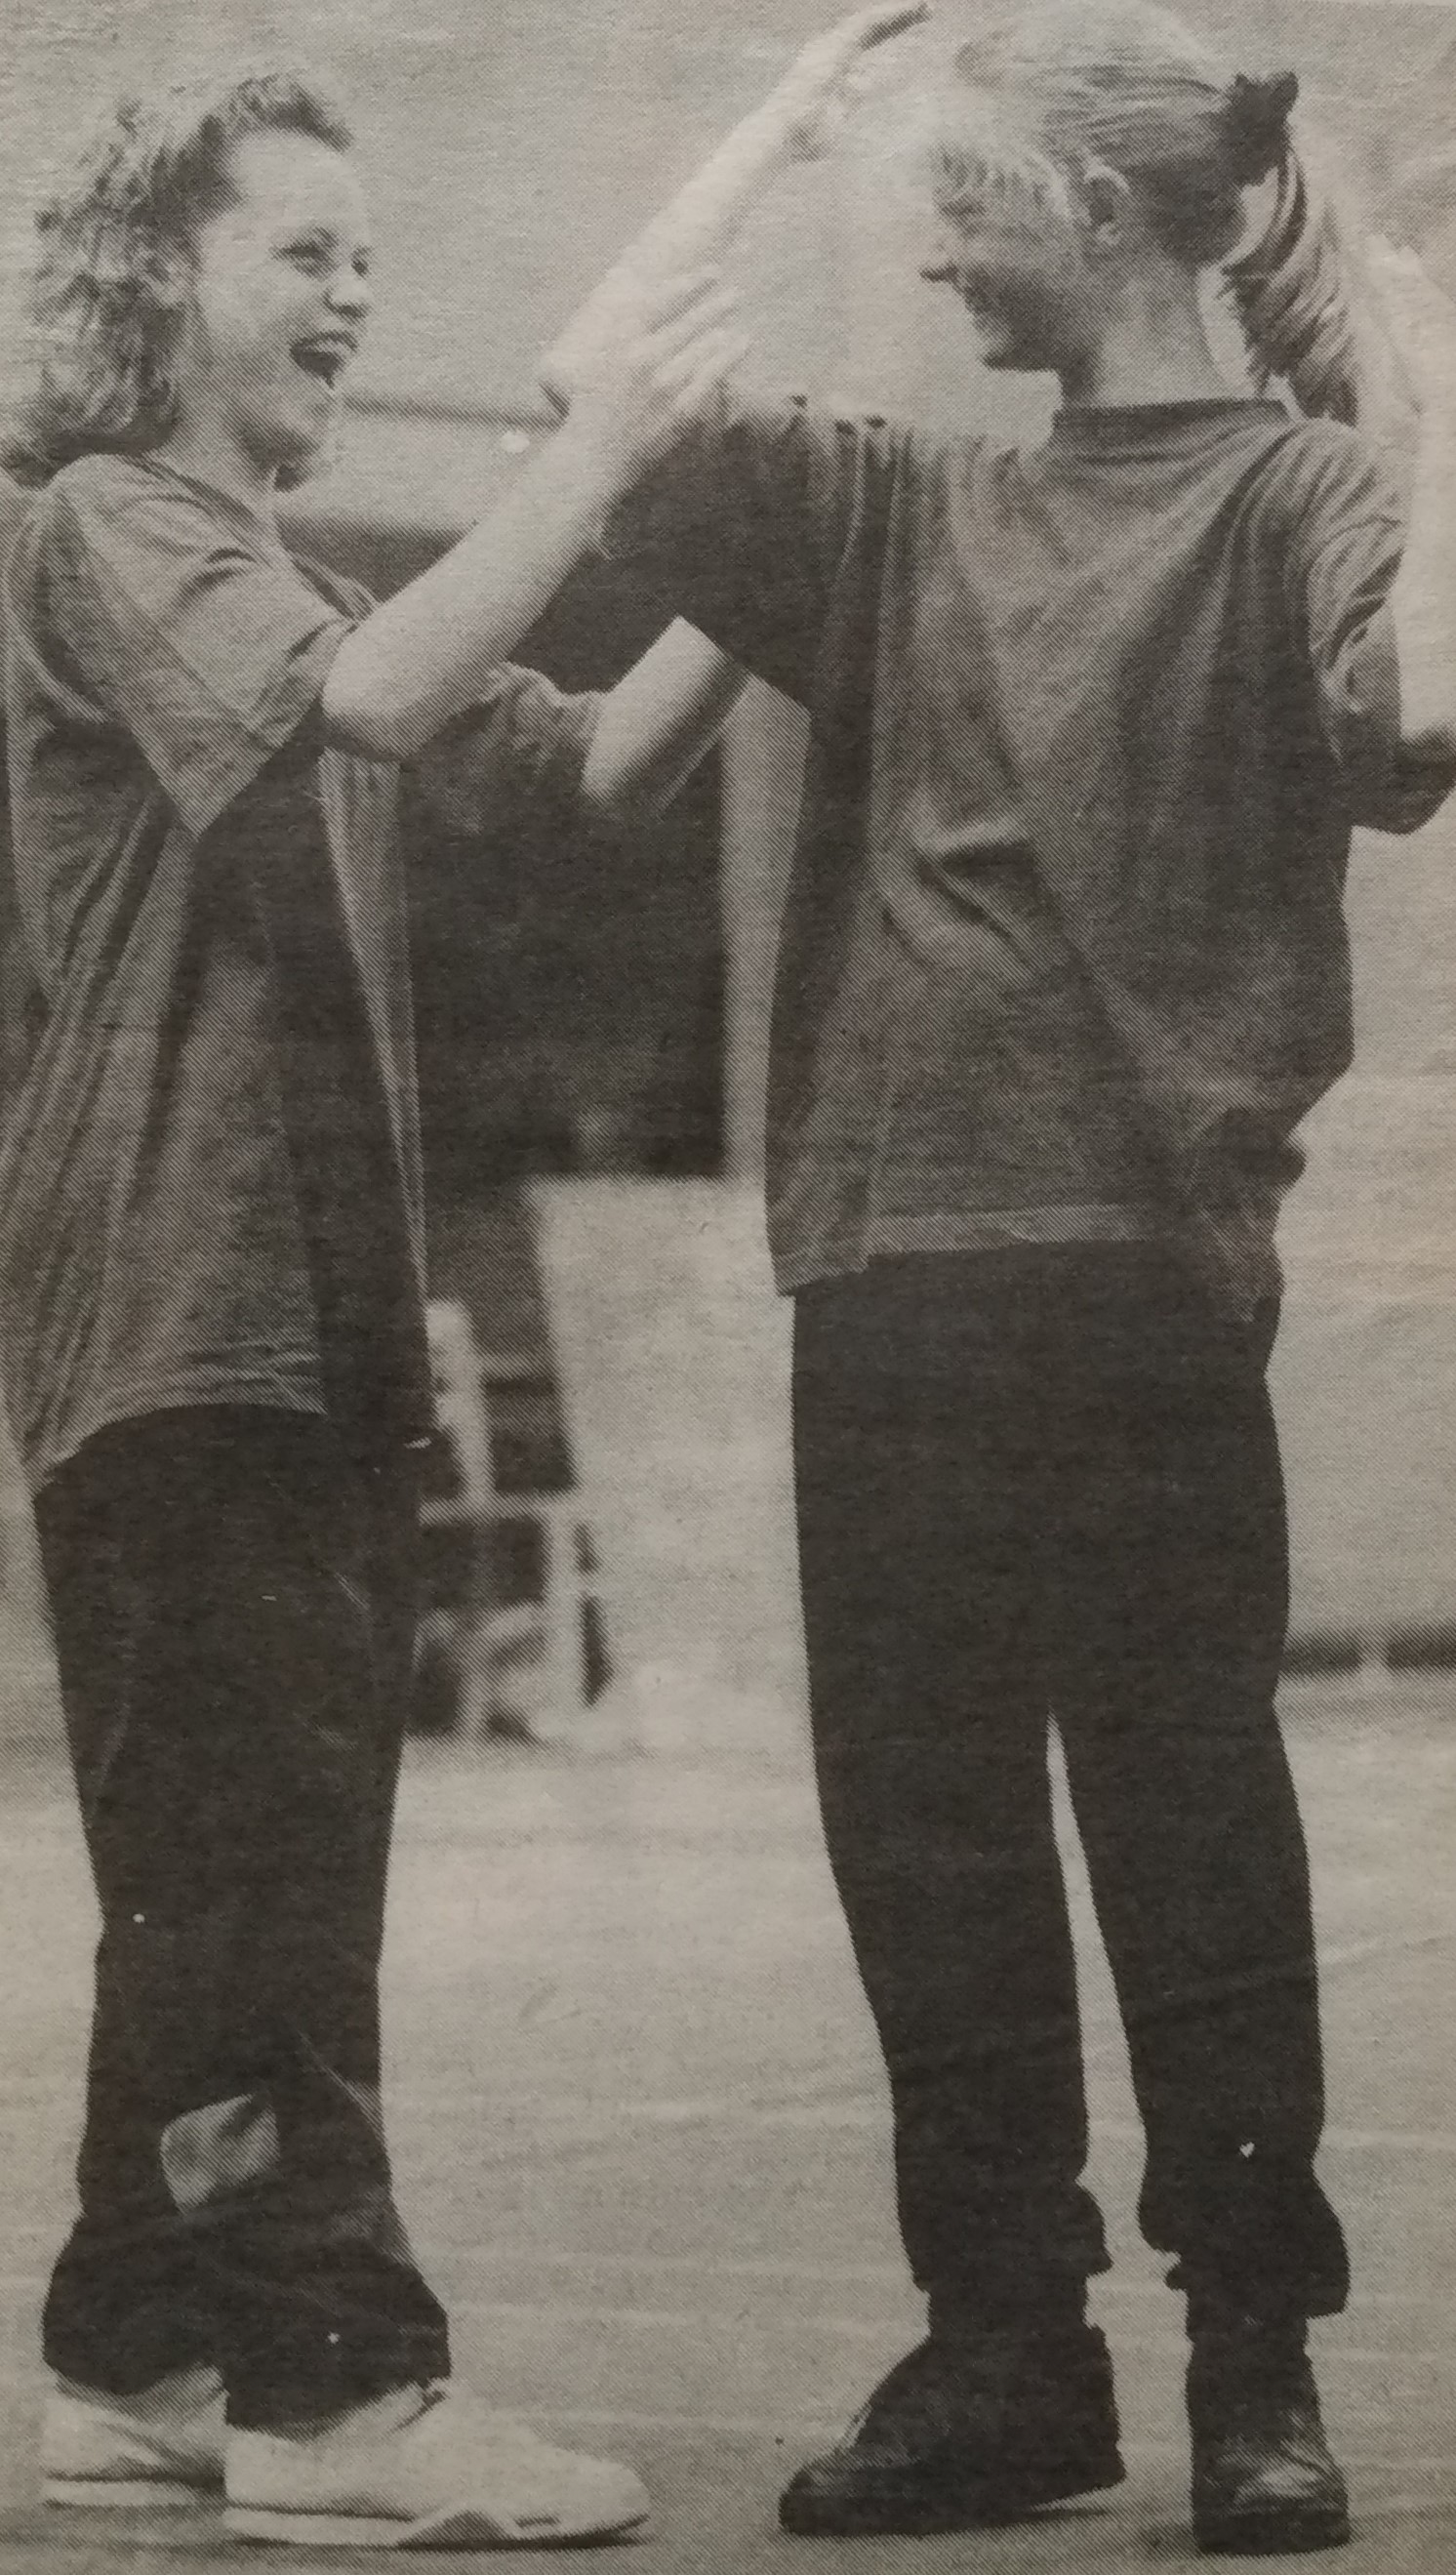 A circus workshop came to the school in July 1992. Kristy Askew and Lucy Walker try out some of the skills they picked up